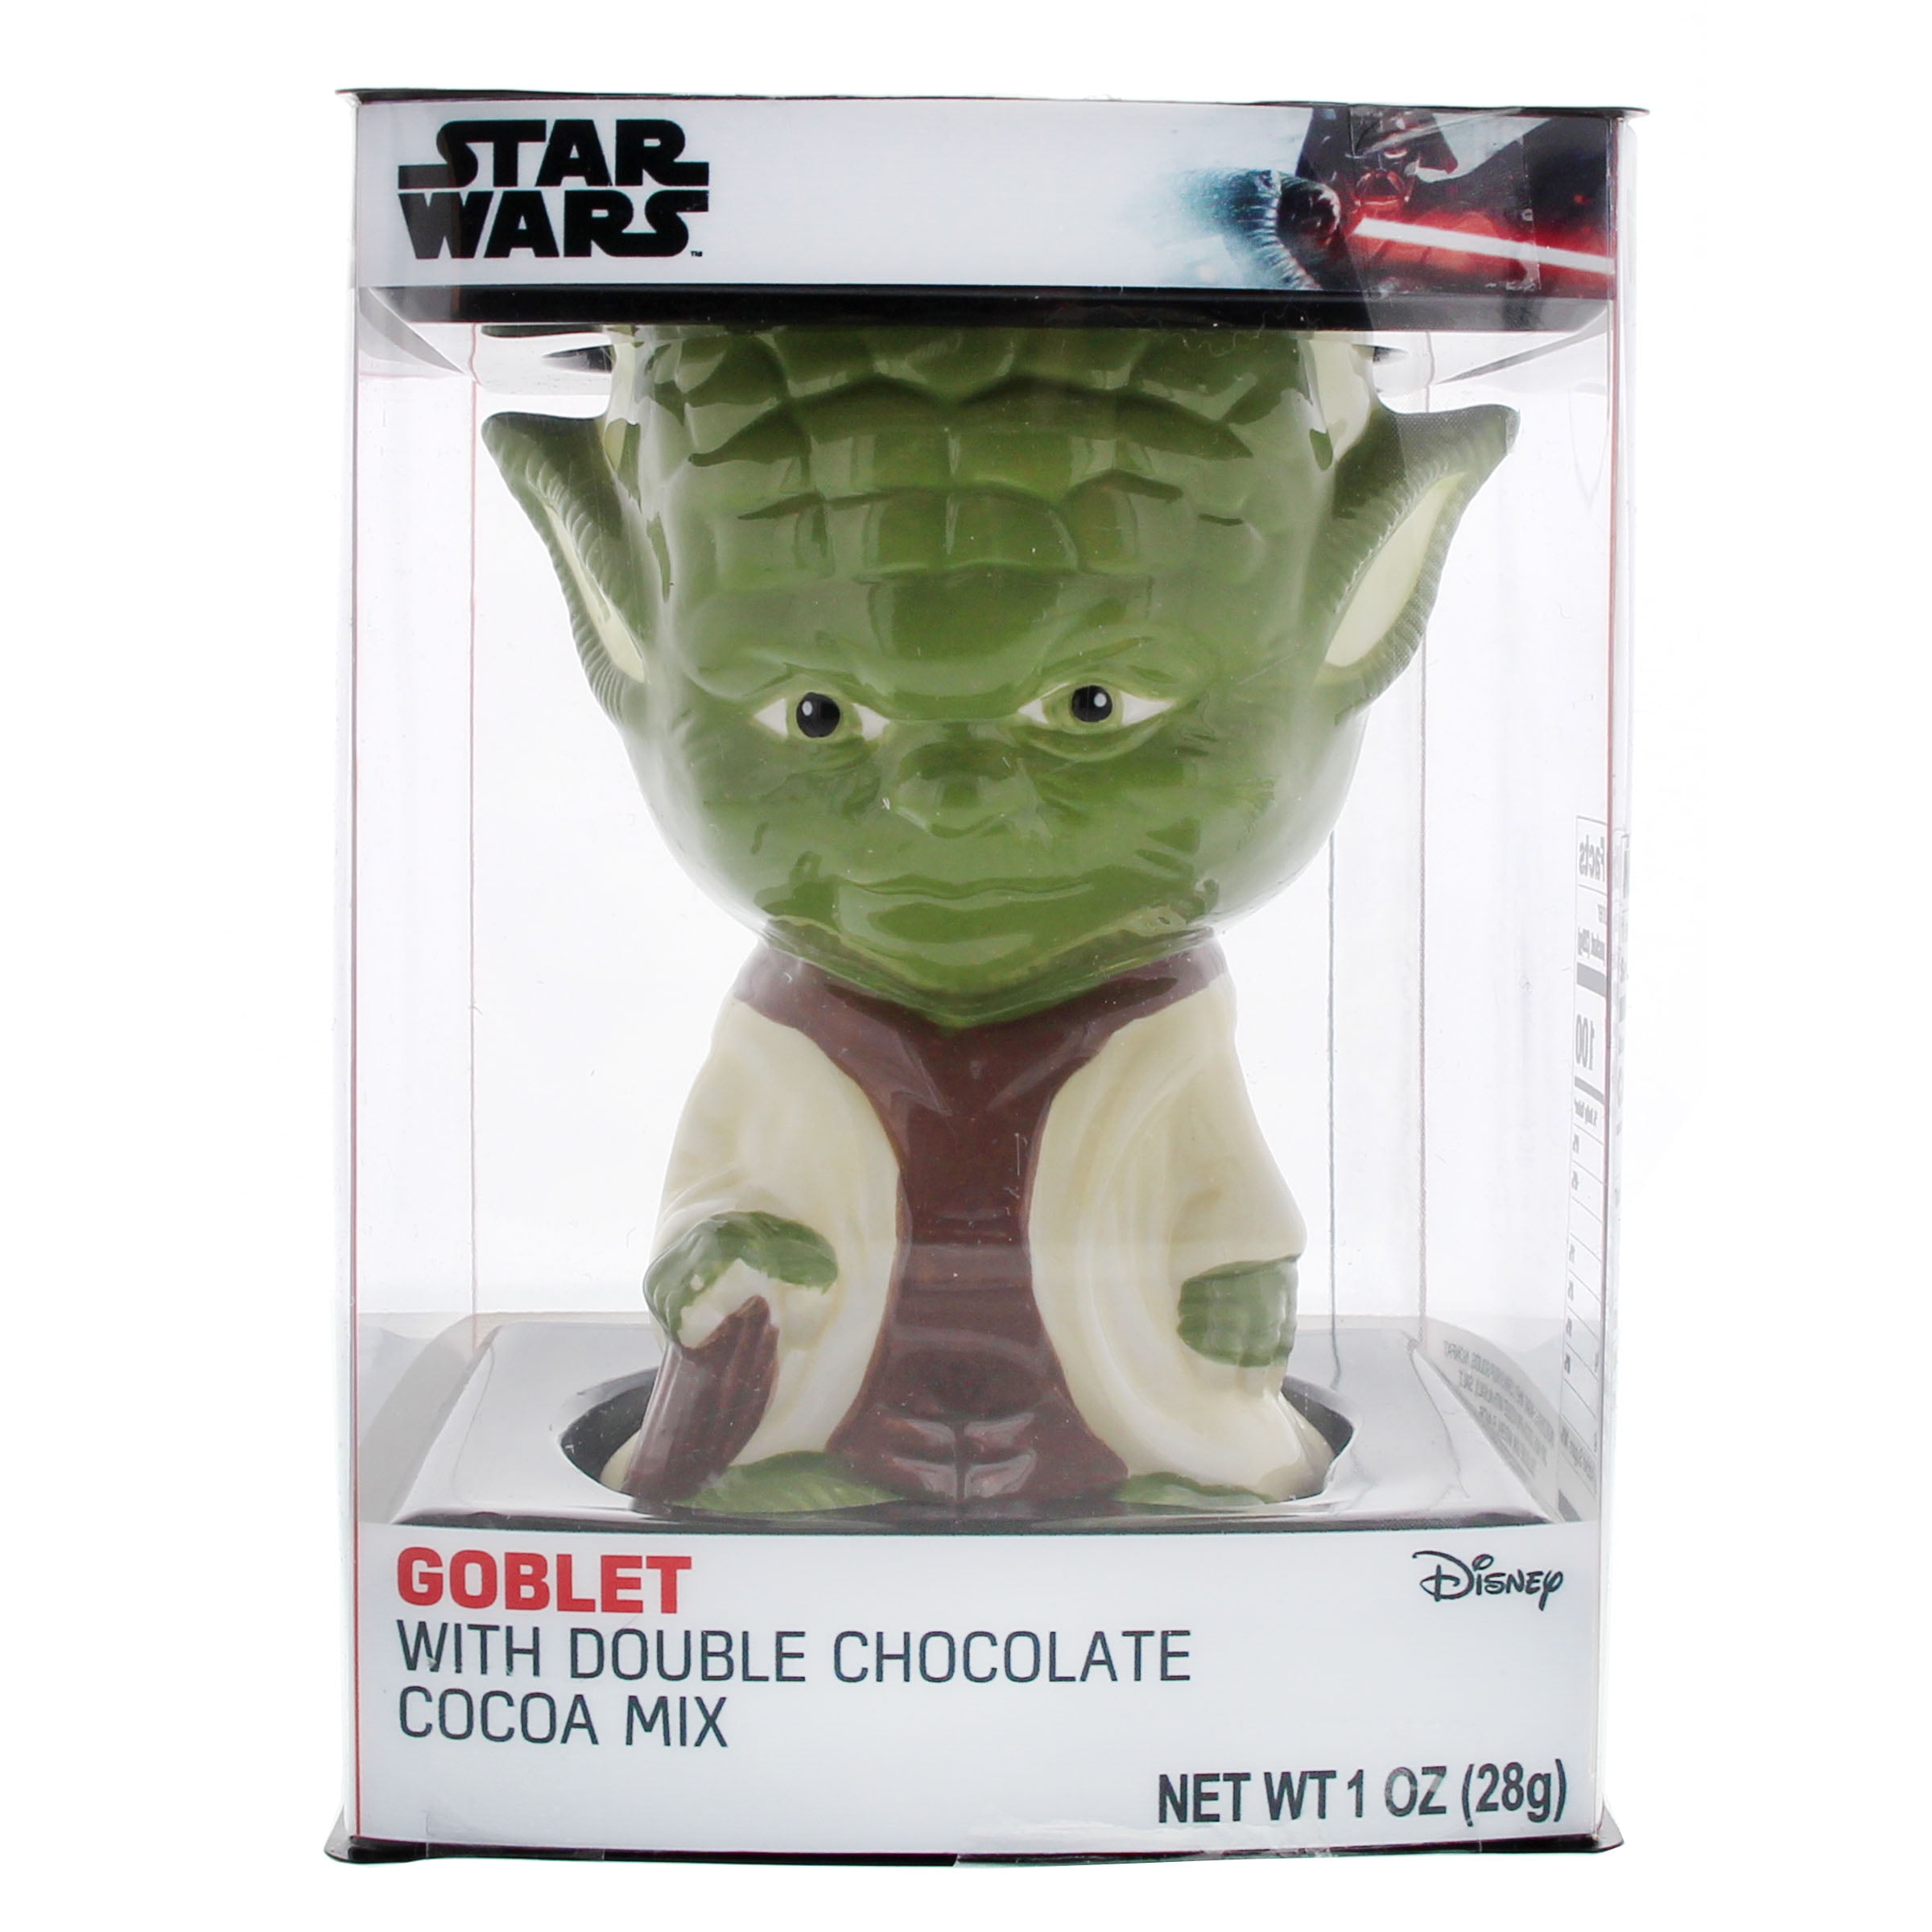 Star Wars Goblet with Chocolate Cocoa Mix